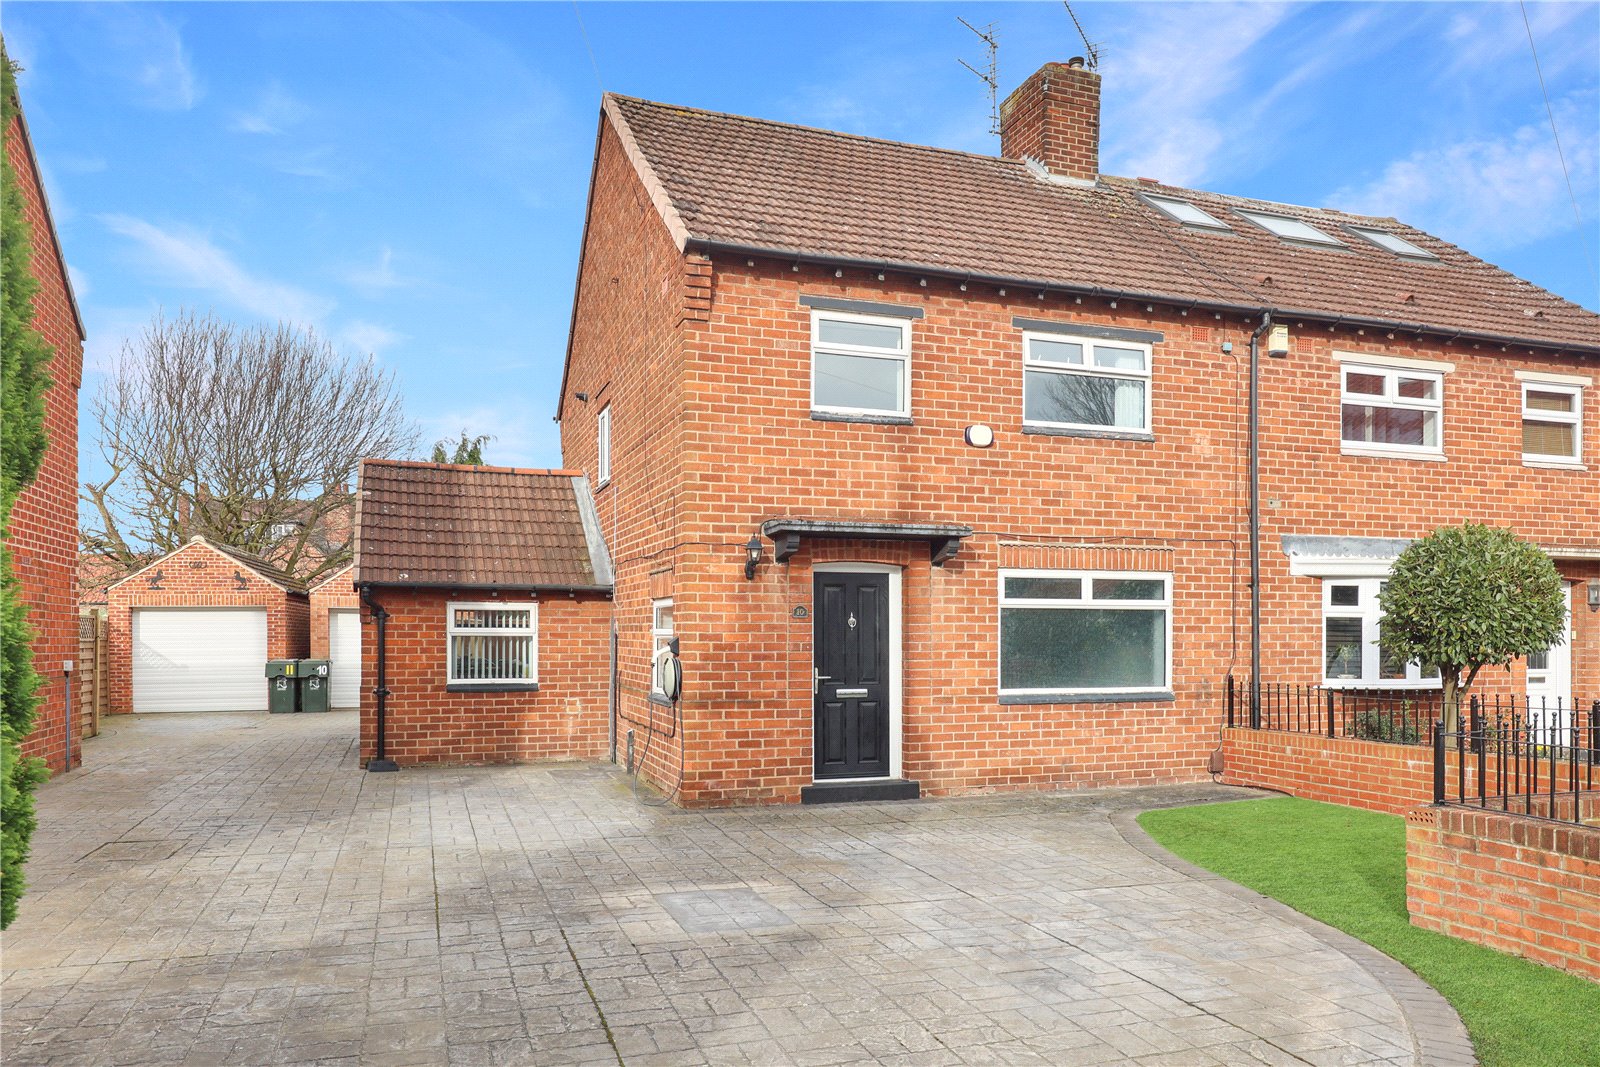 3 bed house for sale in Church Close, Stainton  - Property Image 1